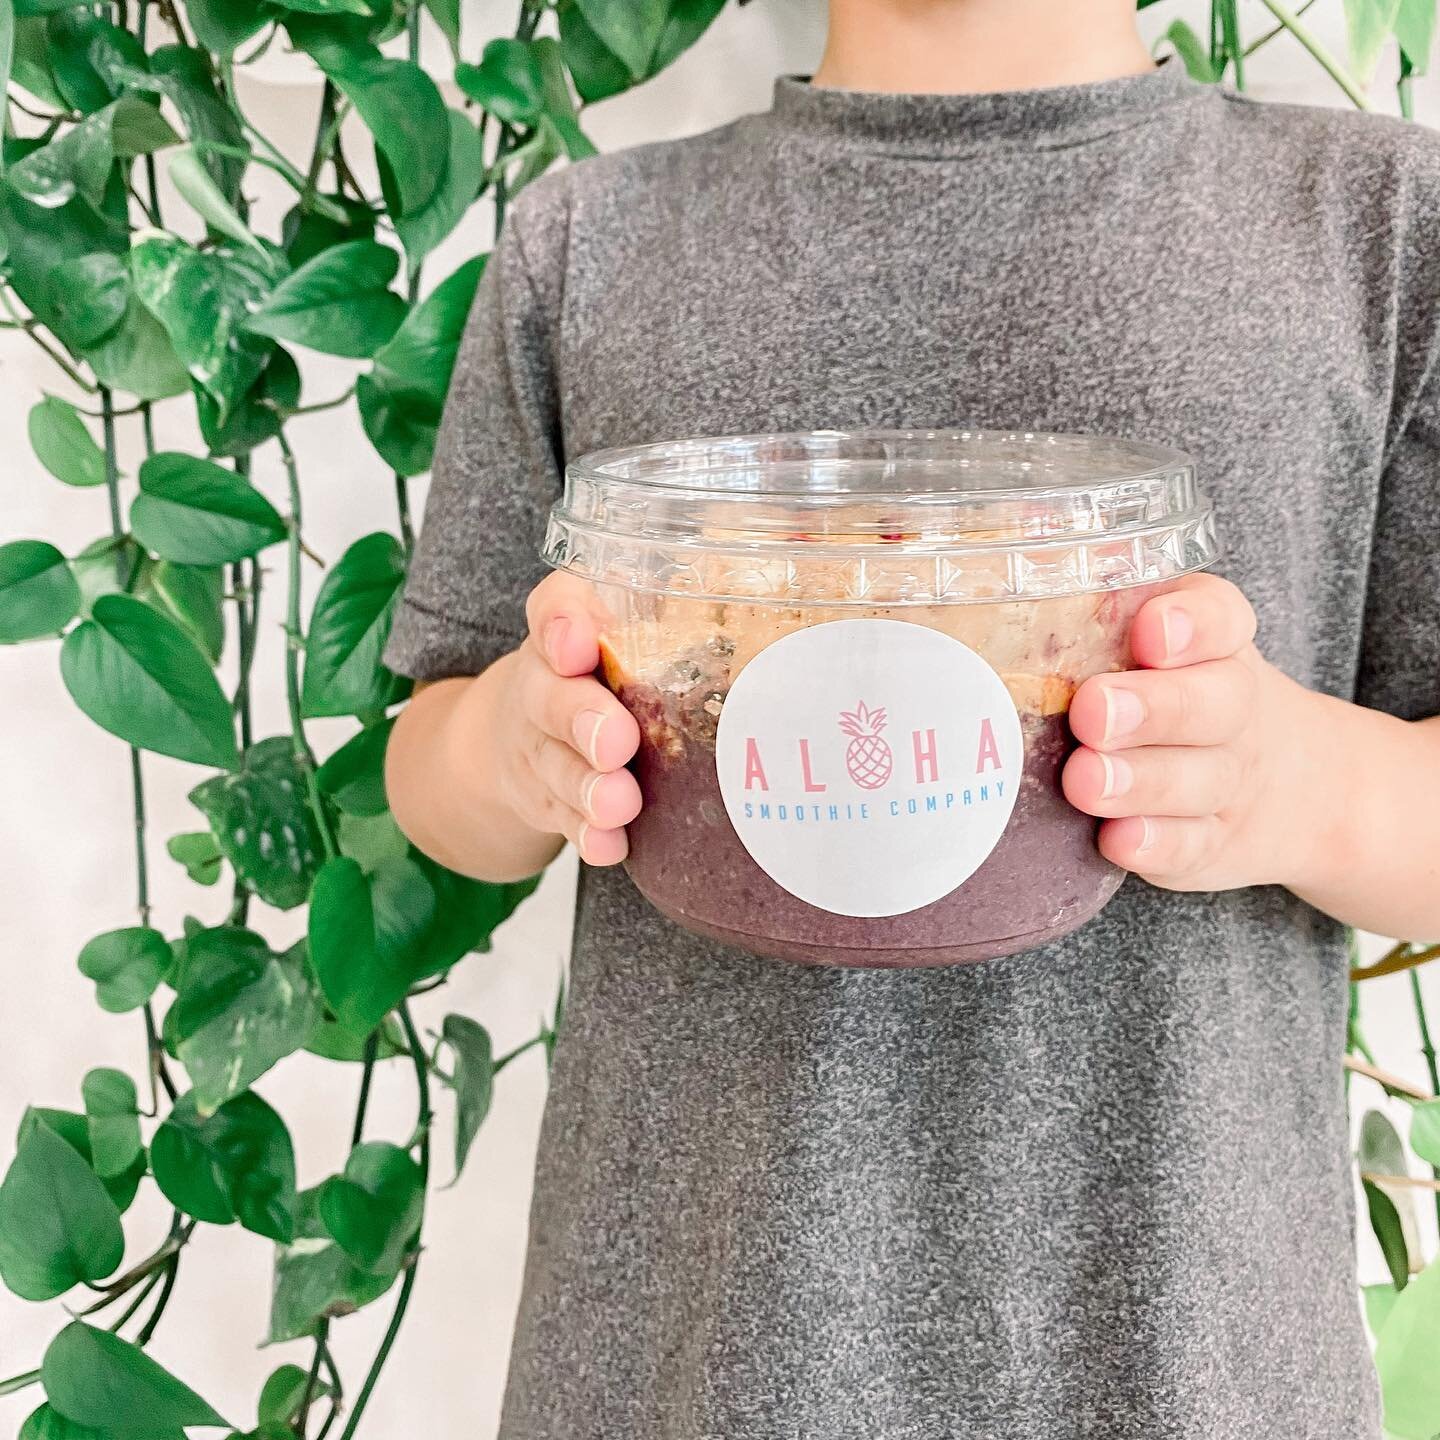 When you&rsquo;re &lsquo;Kid Approved&rsquo; kid sizes are necessary&hellip;

Now serving Kids Smoothie Bowls of our signature recipes &lsquo;Ambler&rsquo;, &lsquo;Monkey&rsquo; and an option to &lsquo;Create Your Own&rsquo;

See you soon ✨
.
.
.
.

